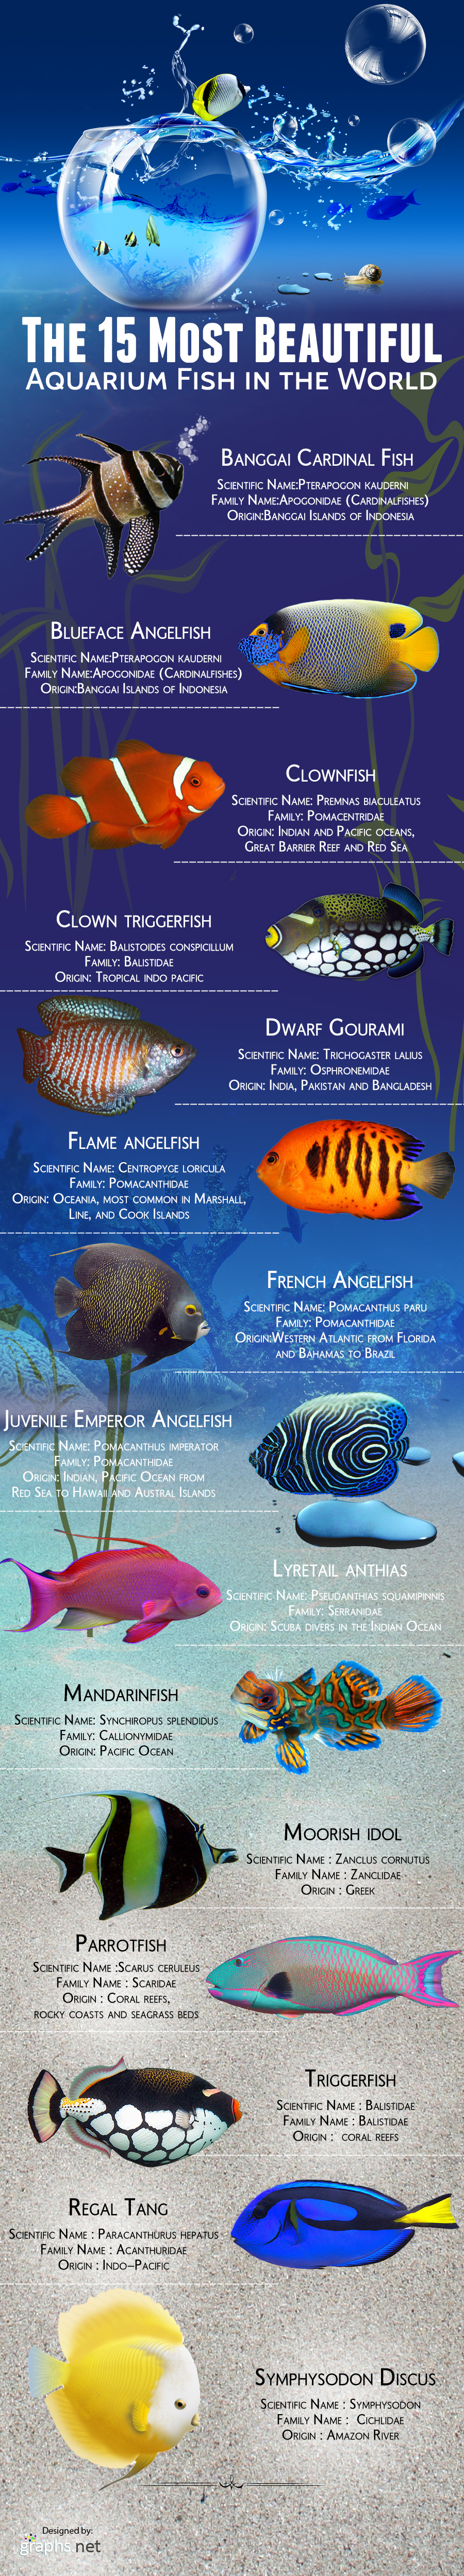 Infographic - the-15-most-beautiful-aquarium-fish-in-the-world